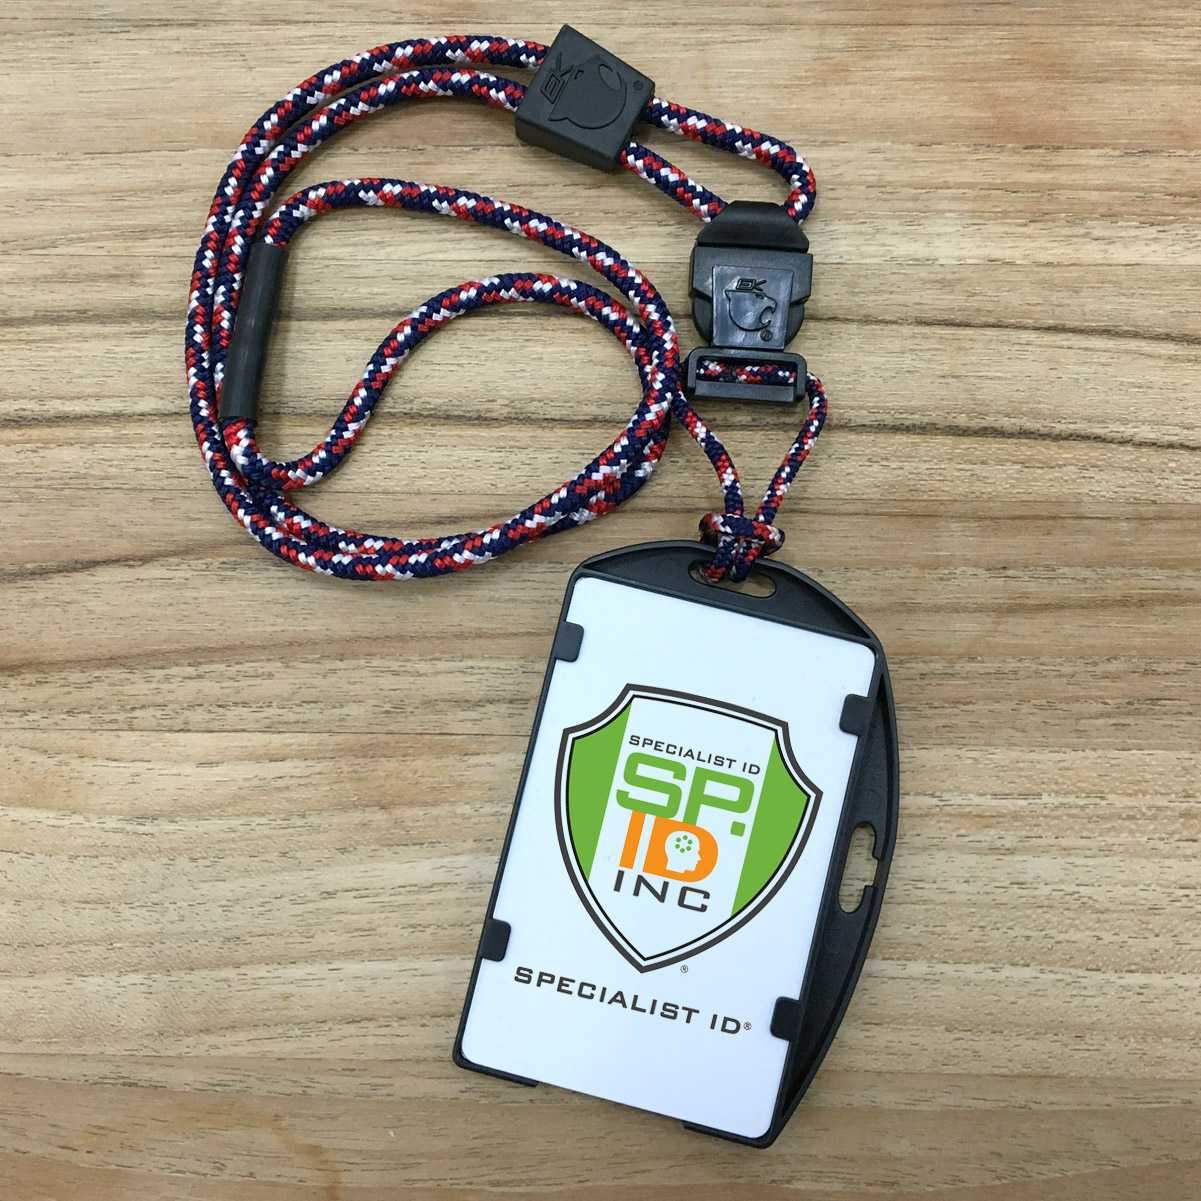 ID badge with a breakaway lanyard placed on a wooden surface. The EK USA RFID Blocking Dual Sided Badge Holder with Heavy Duty Breakaway / Quick Release Lanyard (10943) by EK USA features the Specialist ID logo and branding. The lanyard is red, white, and blue with a black clip.